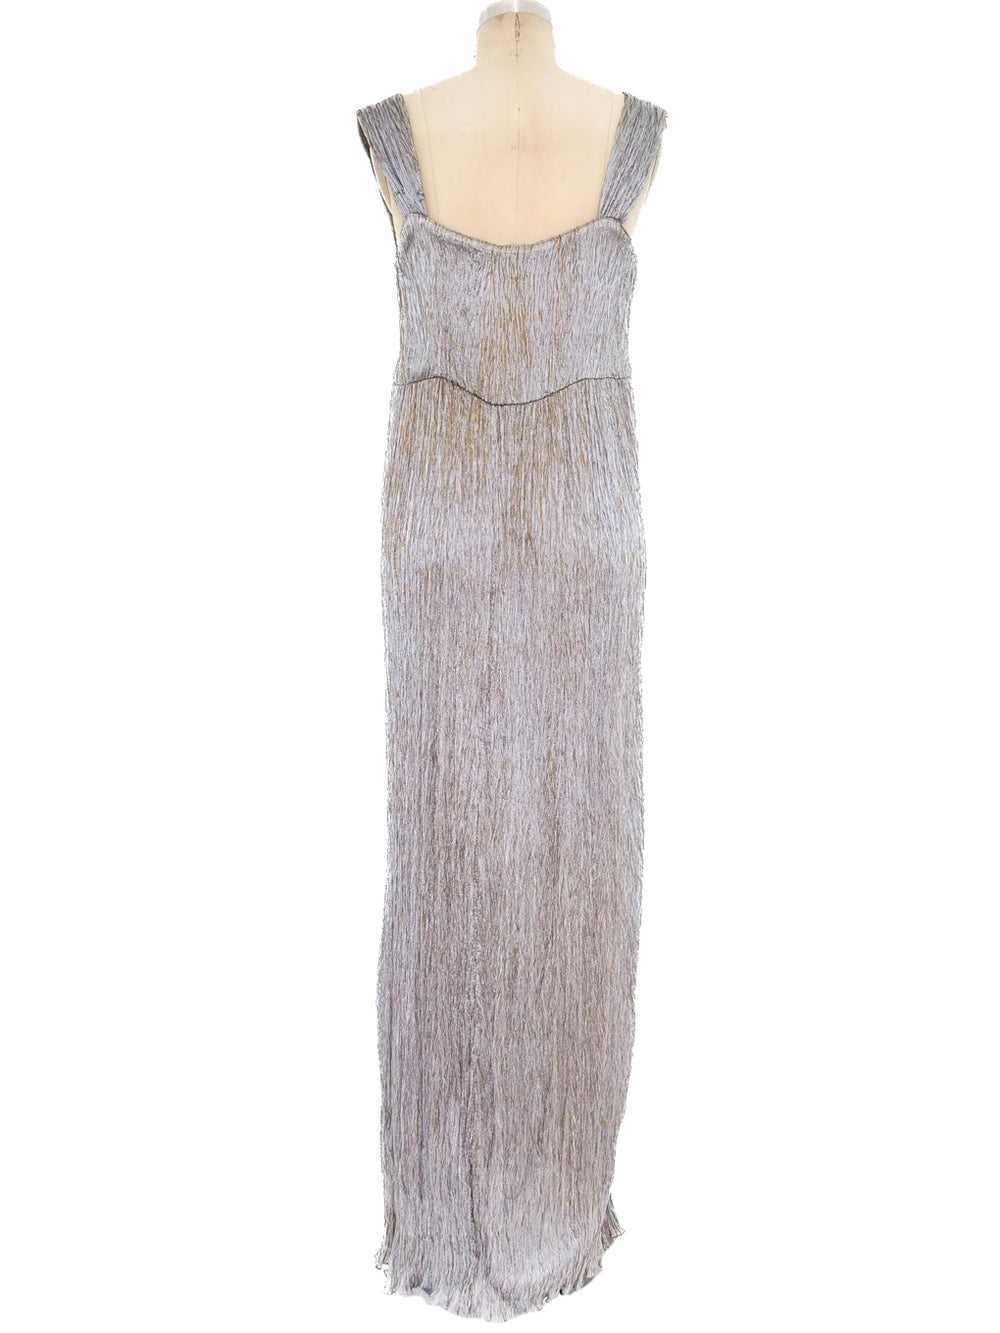 Zandra Rhodes Pleated Column Dress with Duster - image 7